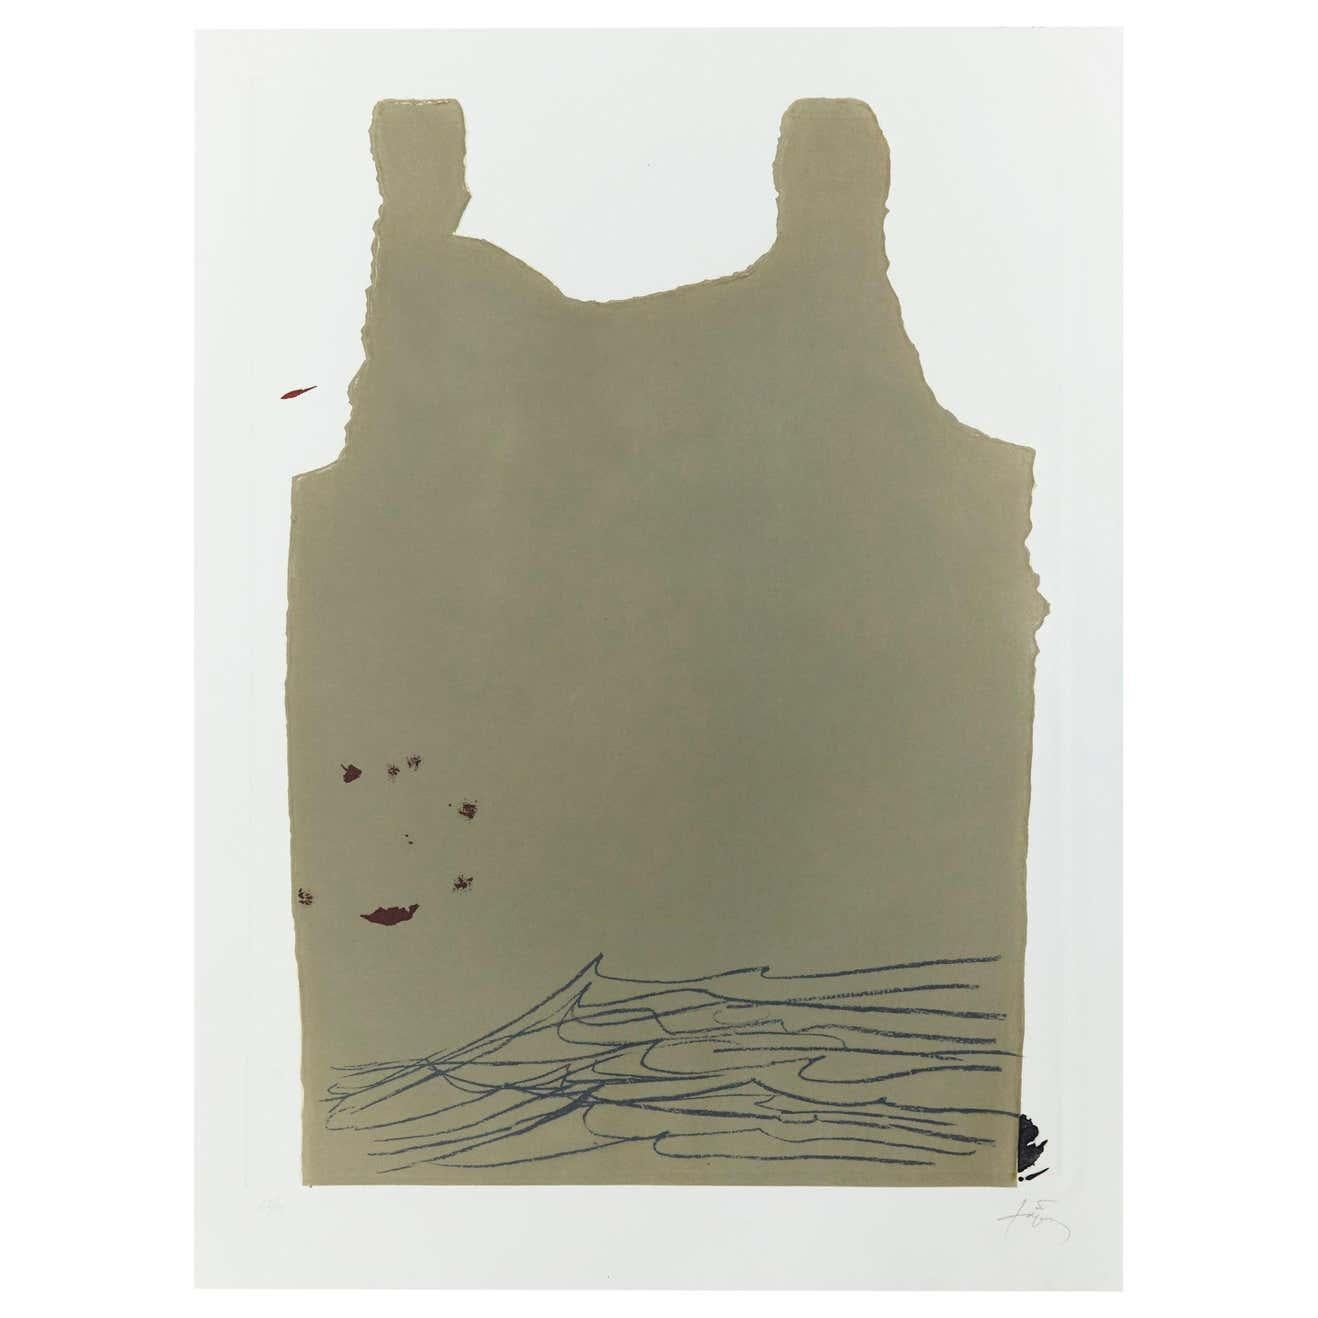 Antoni Tàpies etching
Aparicions-6, 1982 

Measures: 76 x 56 cm 
Hand signed in pencil.

Limited edition of 99 copies.
We have several copies, the number that you purchase my change from the one photographed.

Antoni Tapies born in